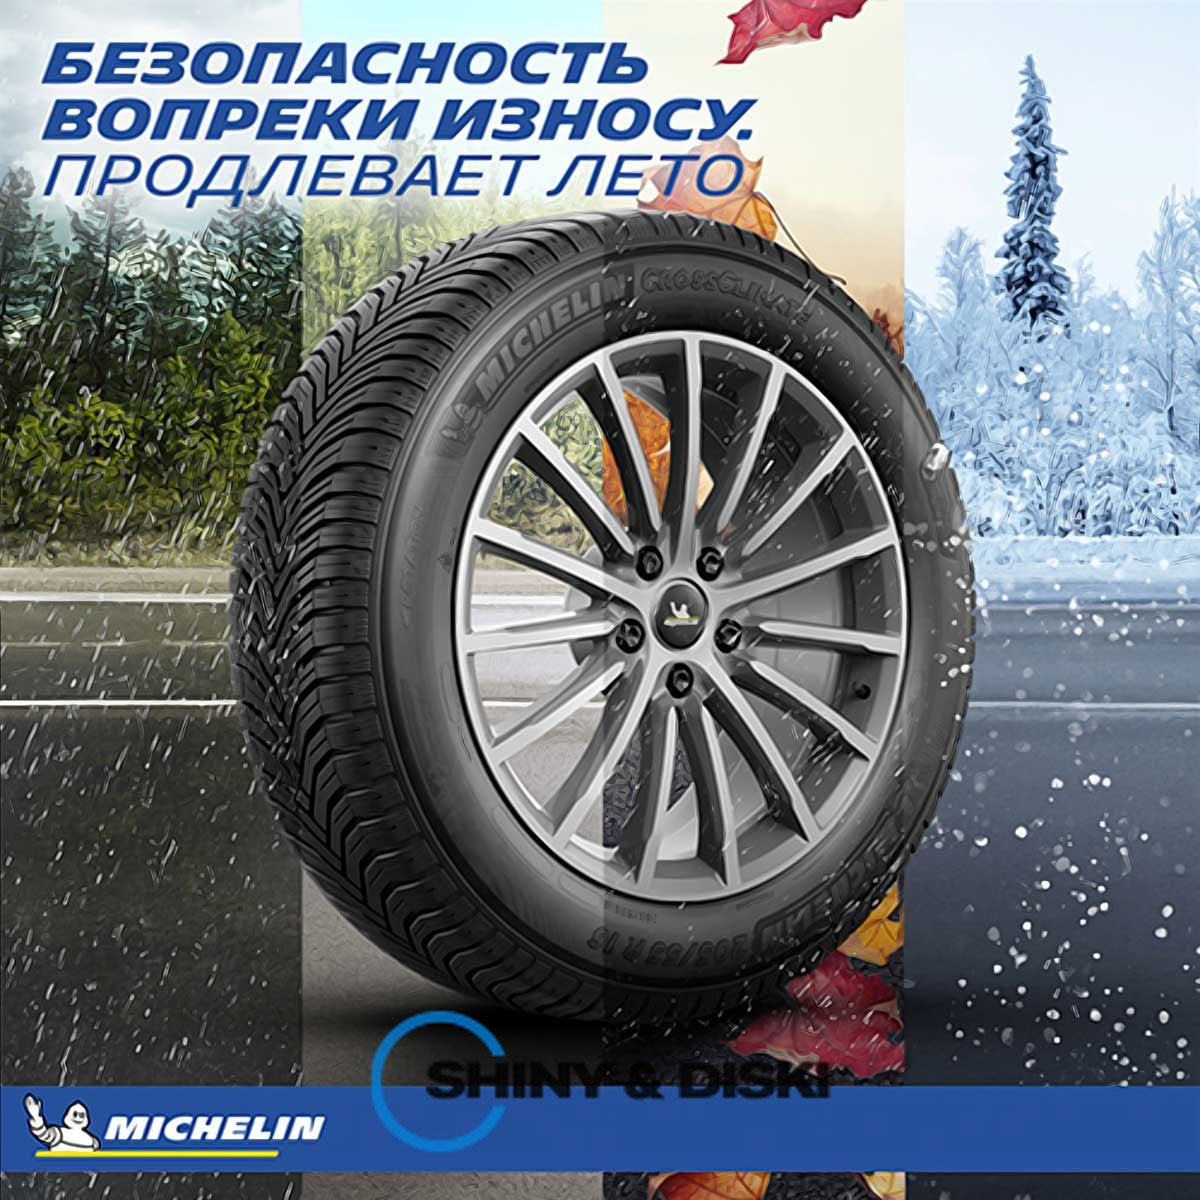 покрышки michelin cross climate+ 185/55 r15 86h